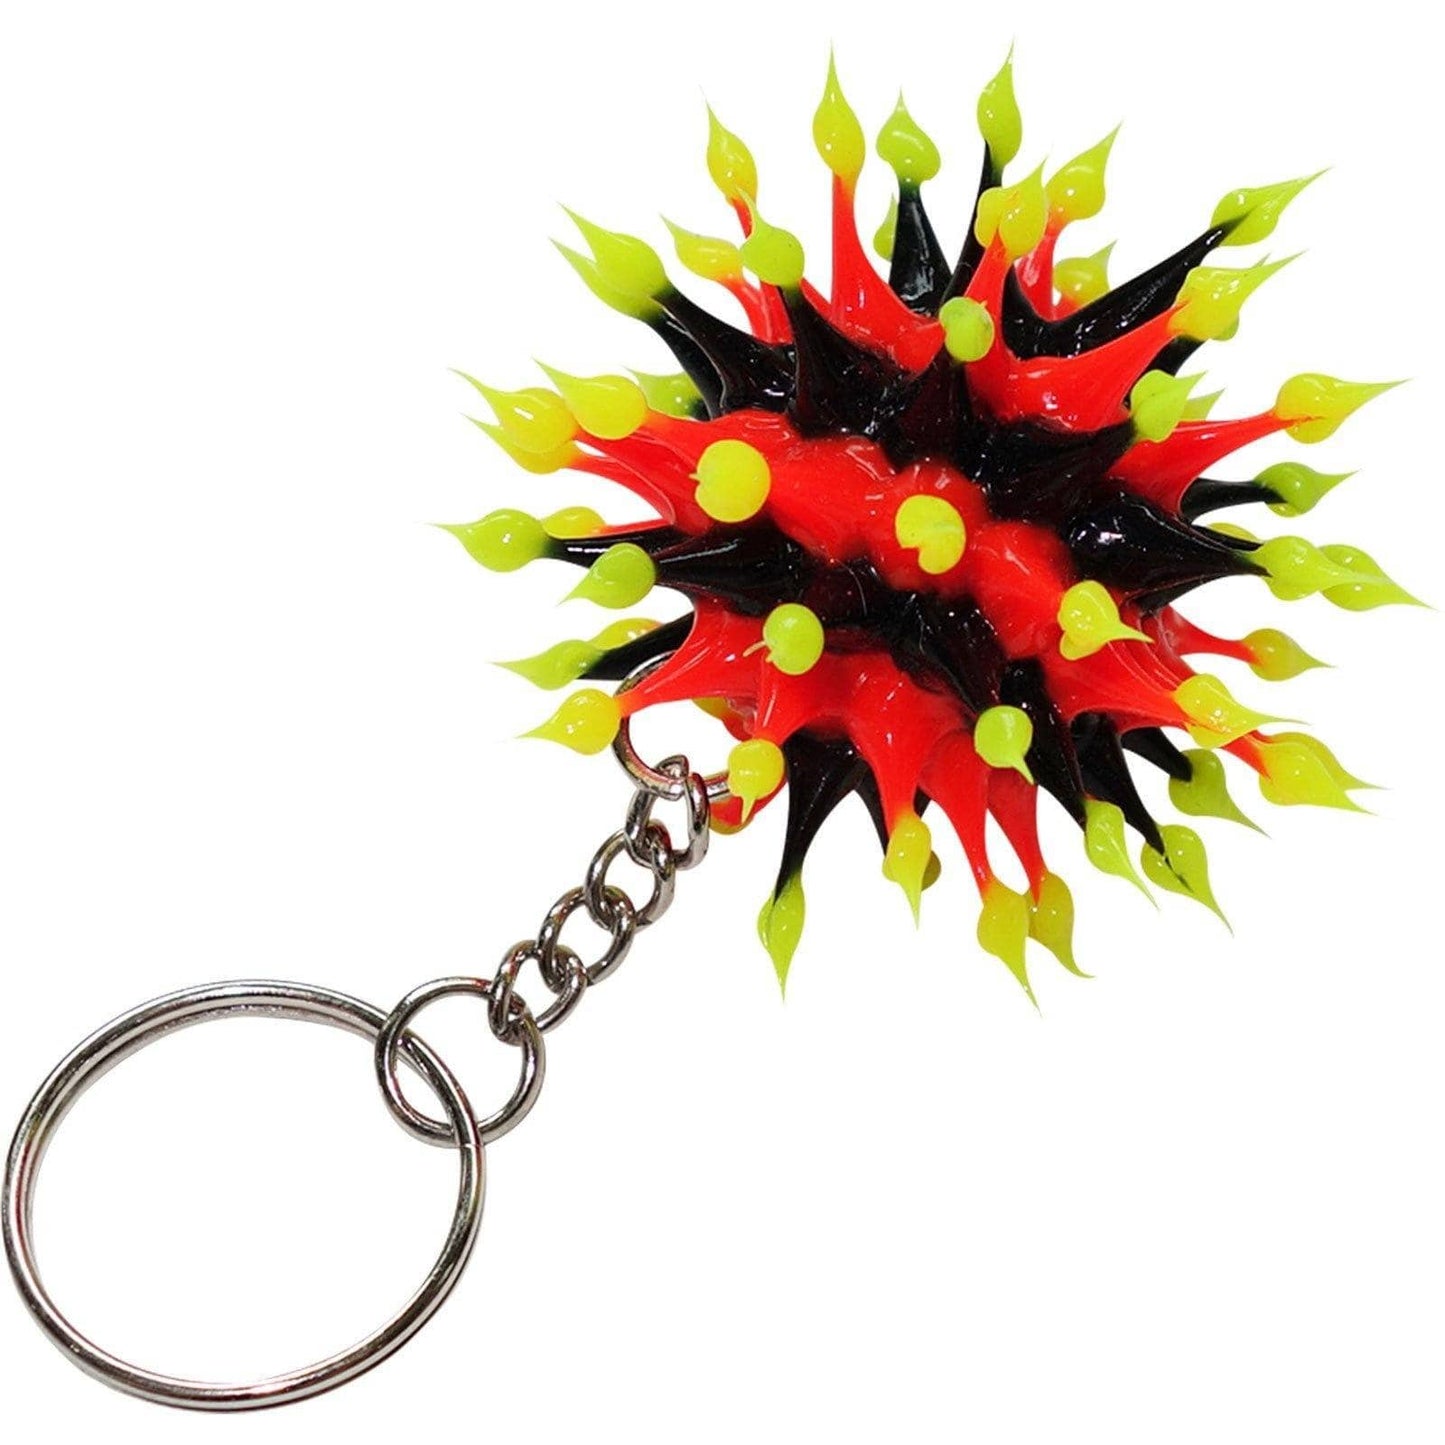 2 X Bright Spiky Neon Ball Keyrings Rubber Silicone Keychains Key Ring Fobs Toys